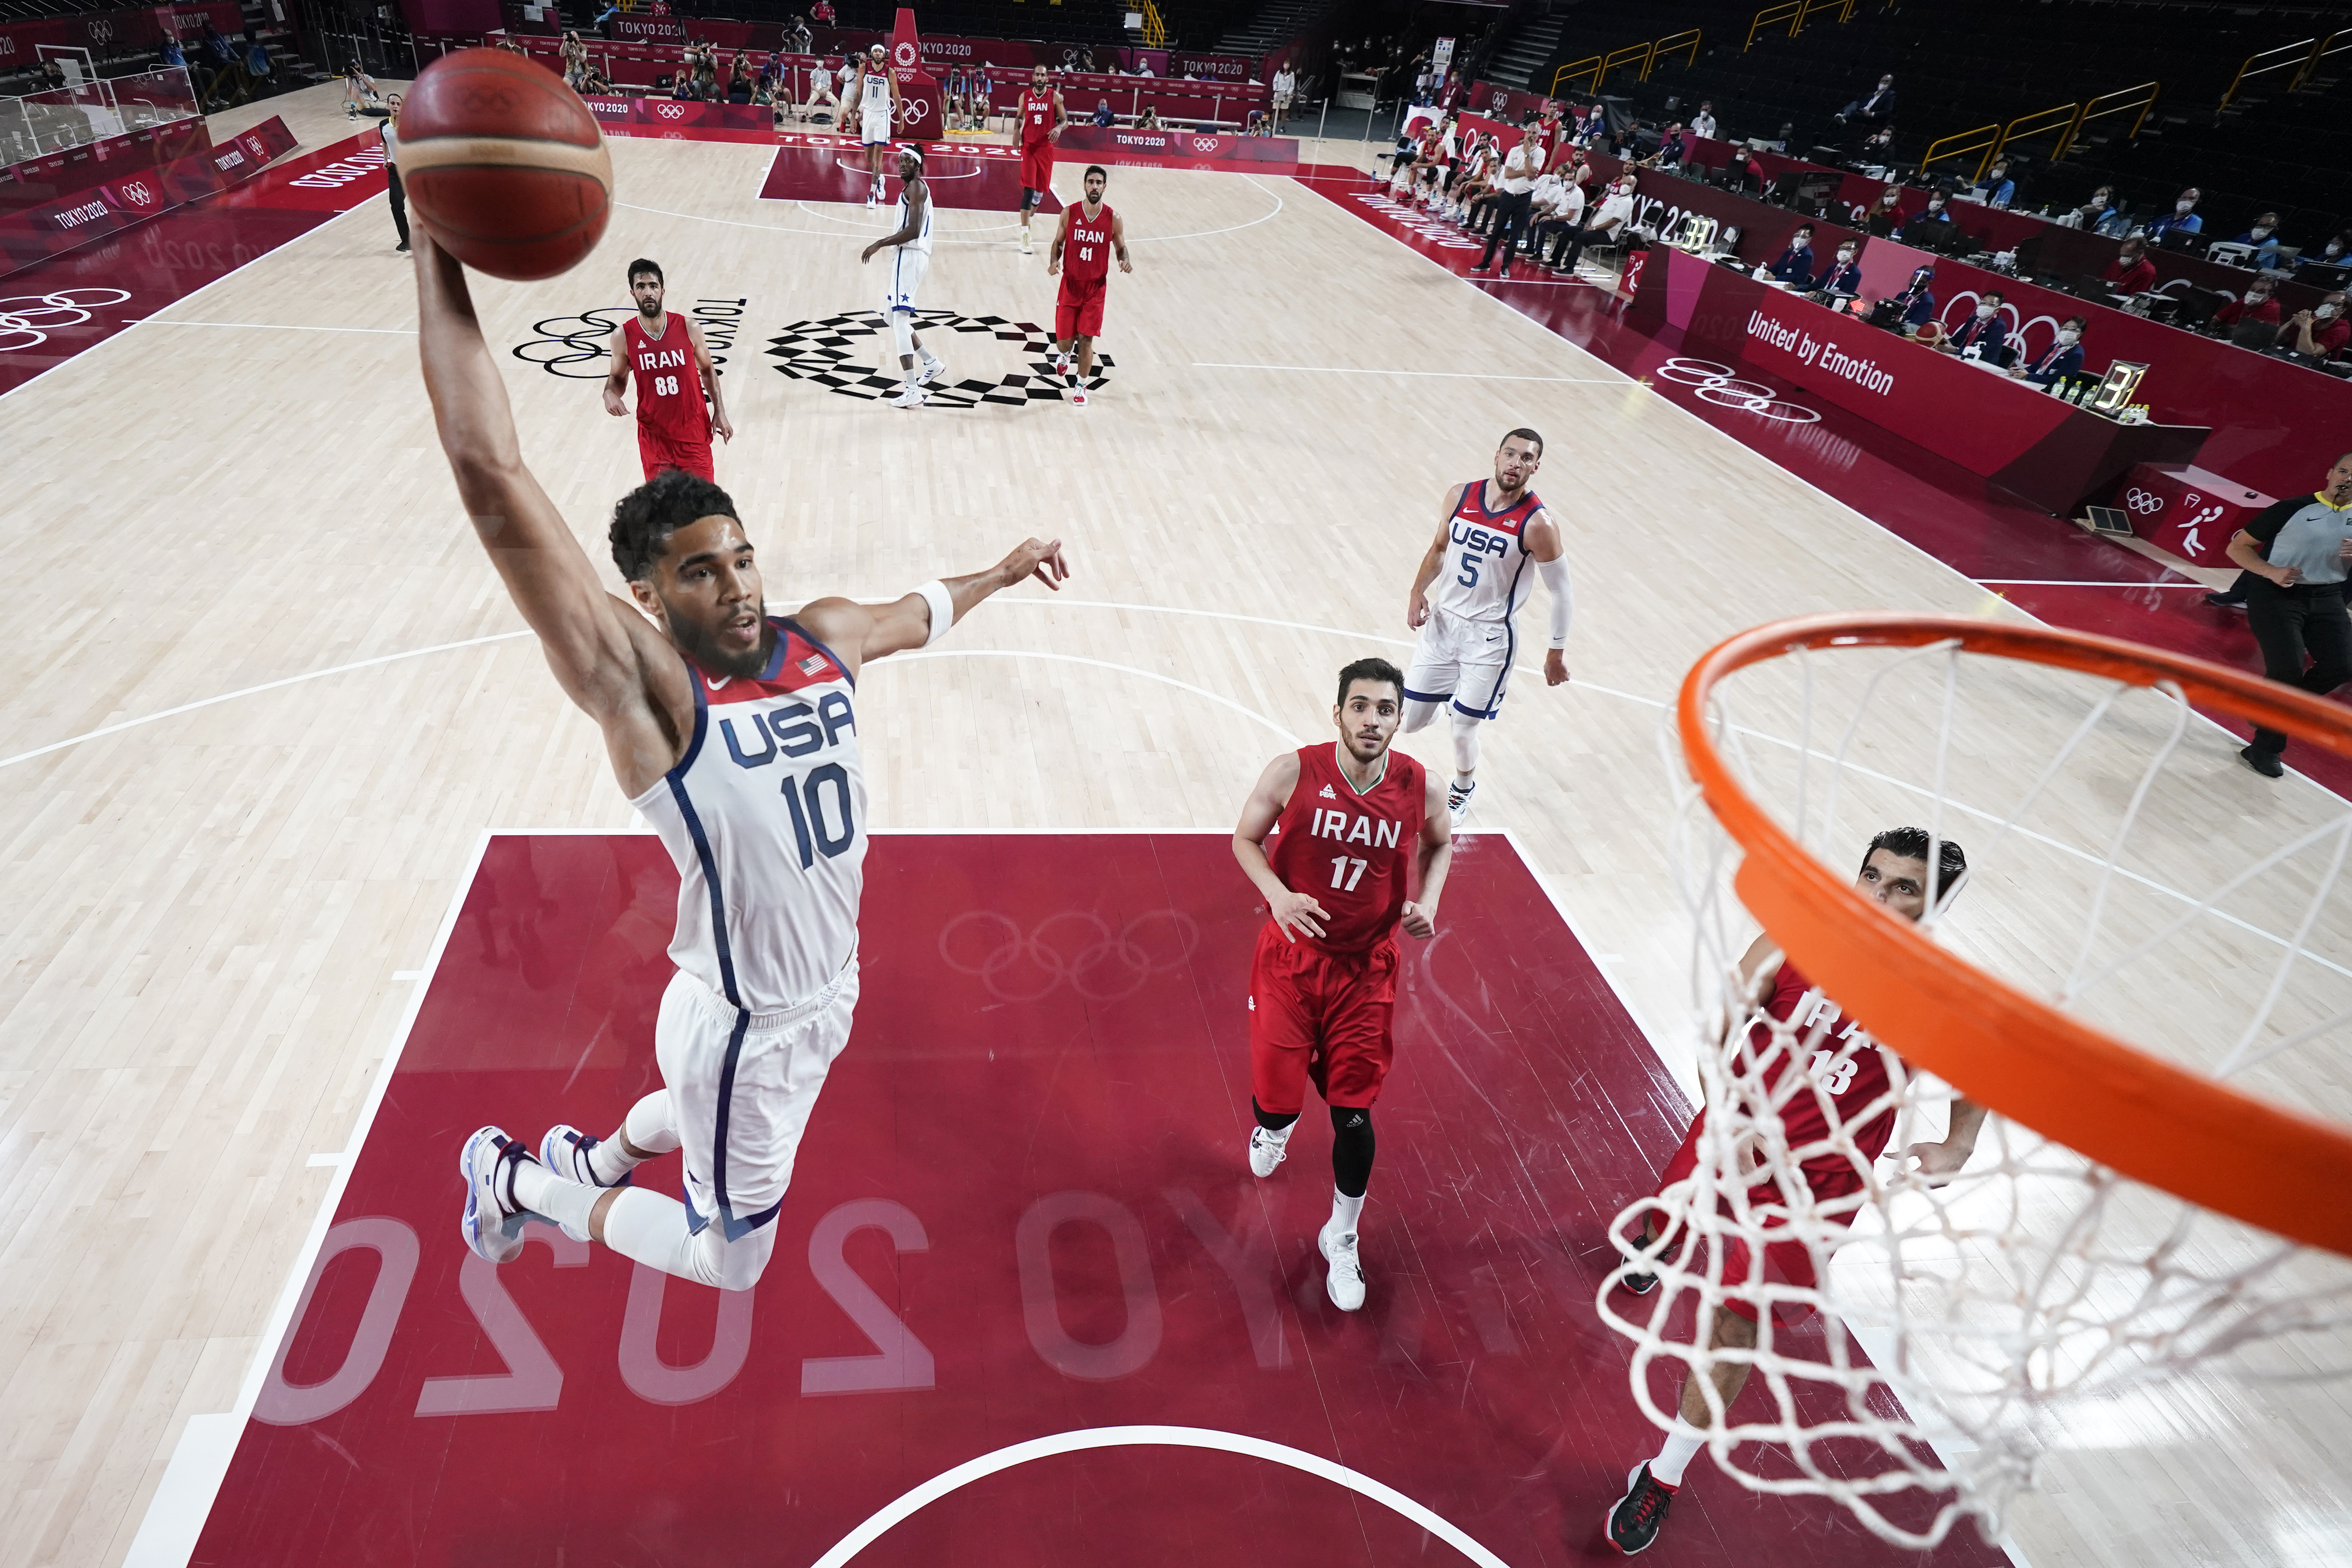 US men's basketball team gets easy Olympics win against Iran